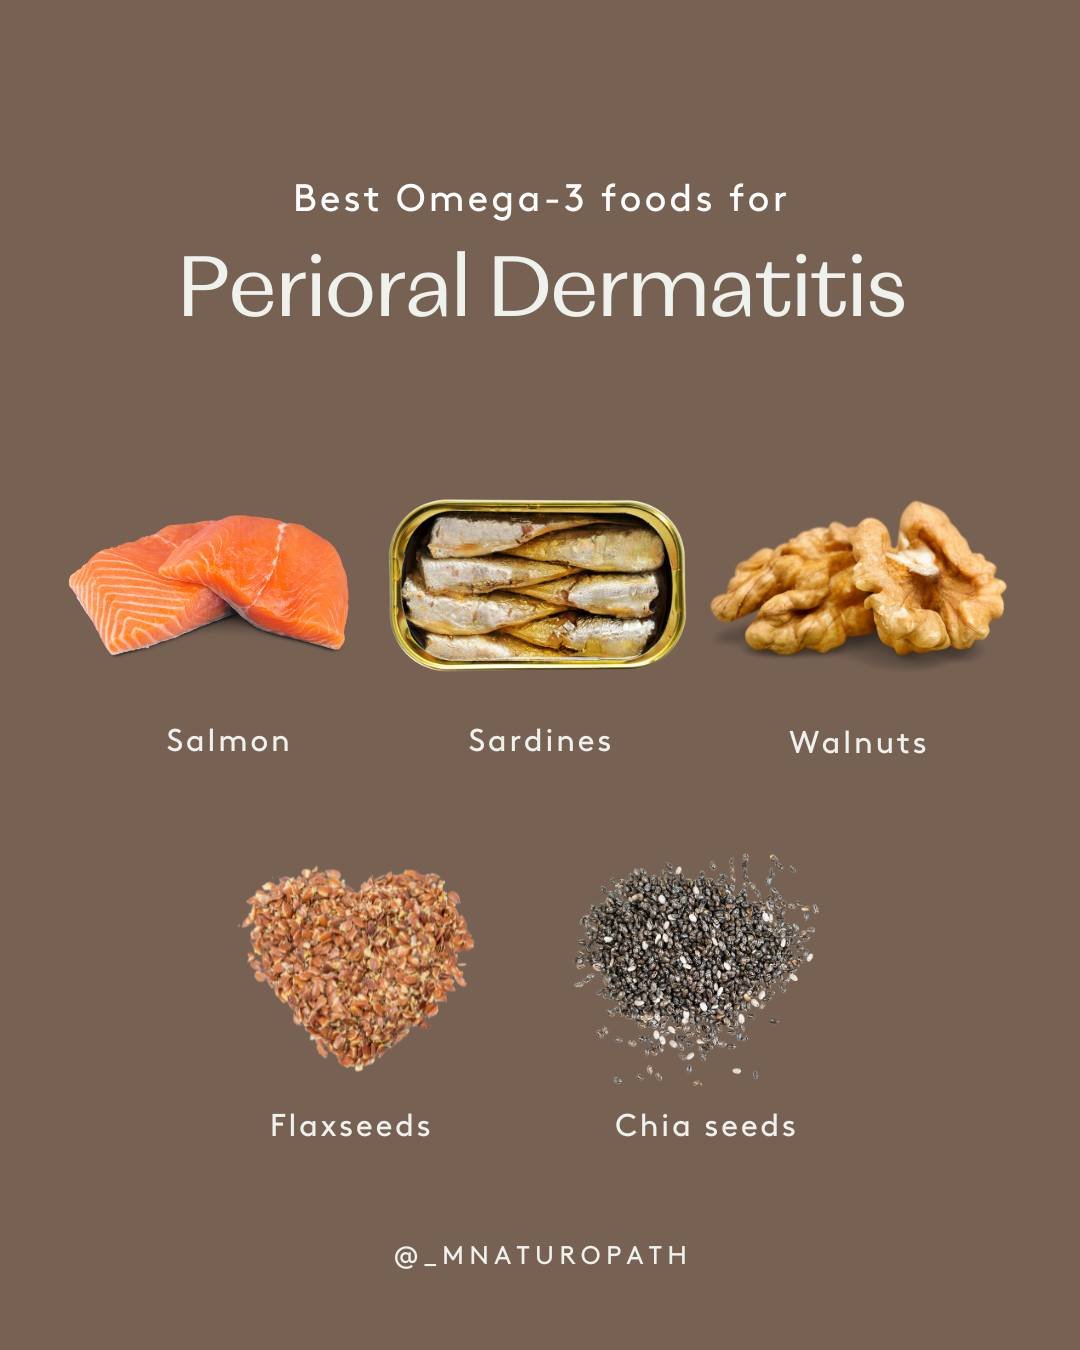 What are the best Omega-3-rich foods to support perioral dermatitis?

1️⃣Salmon is rich in EPA and DHA. These essential fatty acids found in salmon help reduce inflammation, promoting skin healing and resilience against perioral dermatitis.

2️⃣Sardi